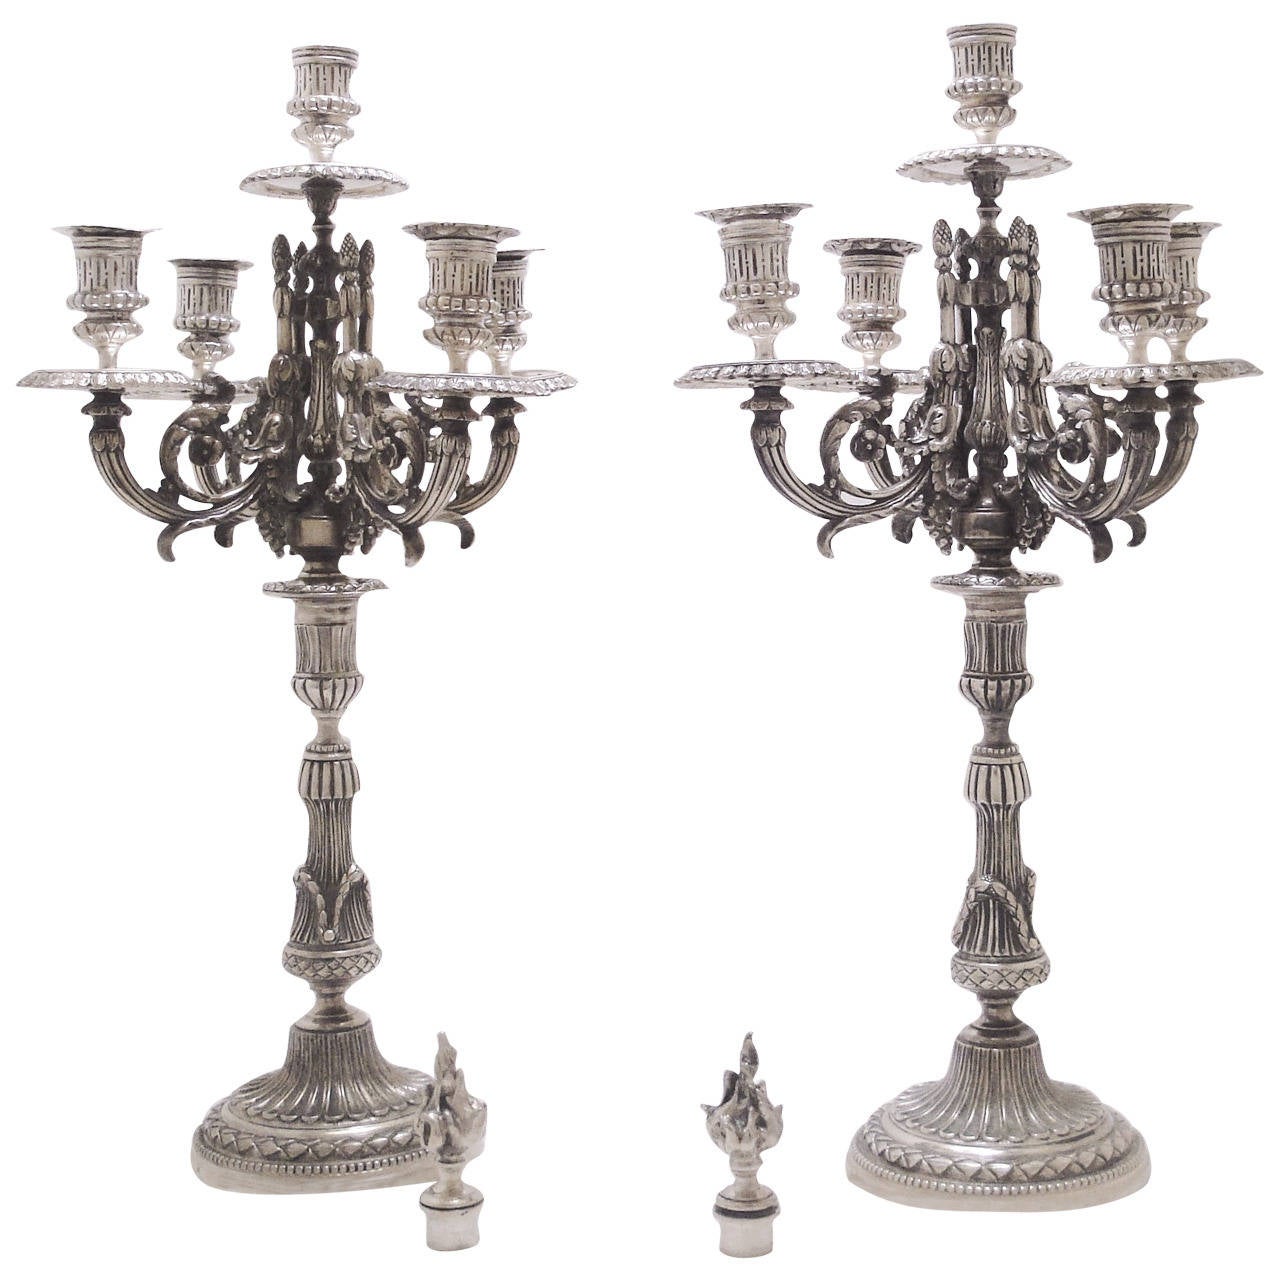 Pair of 19th c. French 4 Branch Silver Plated Candelabra with snuffers